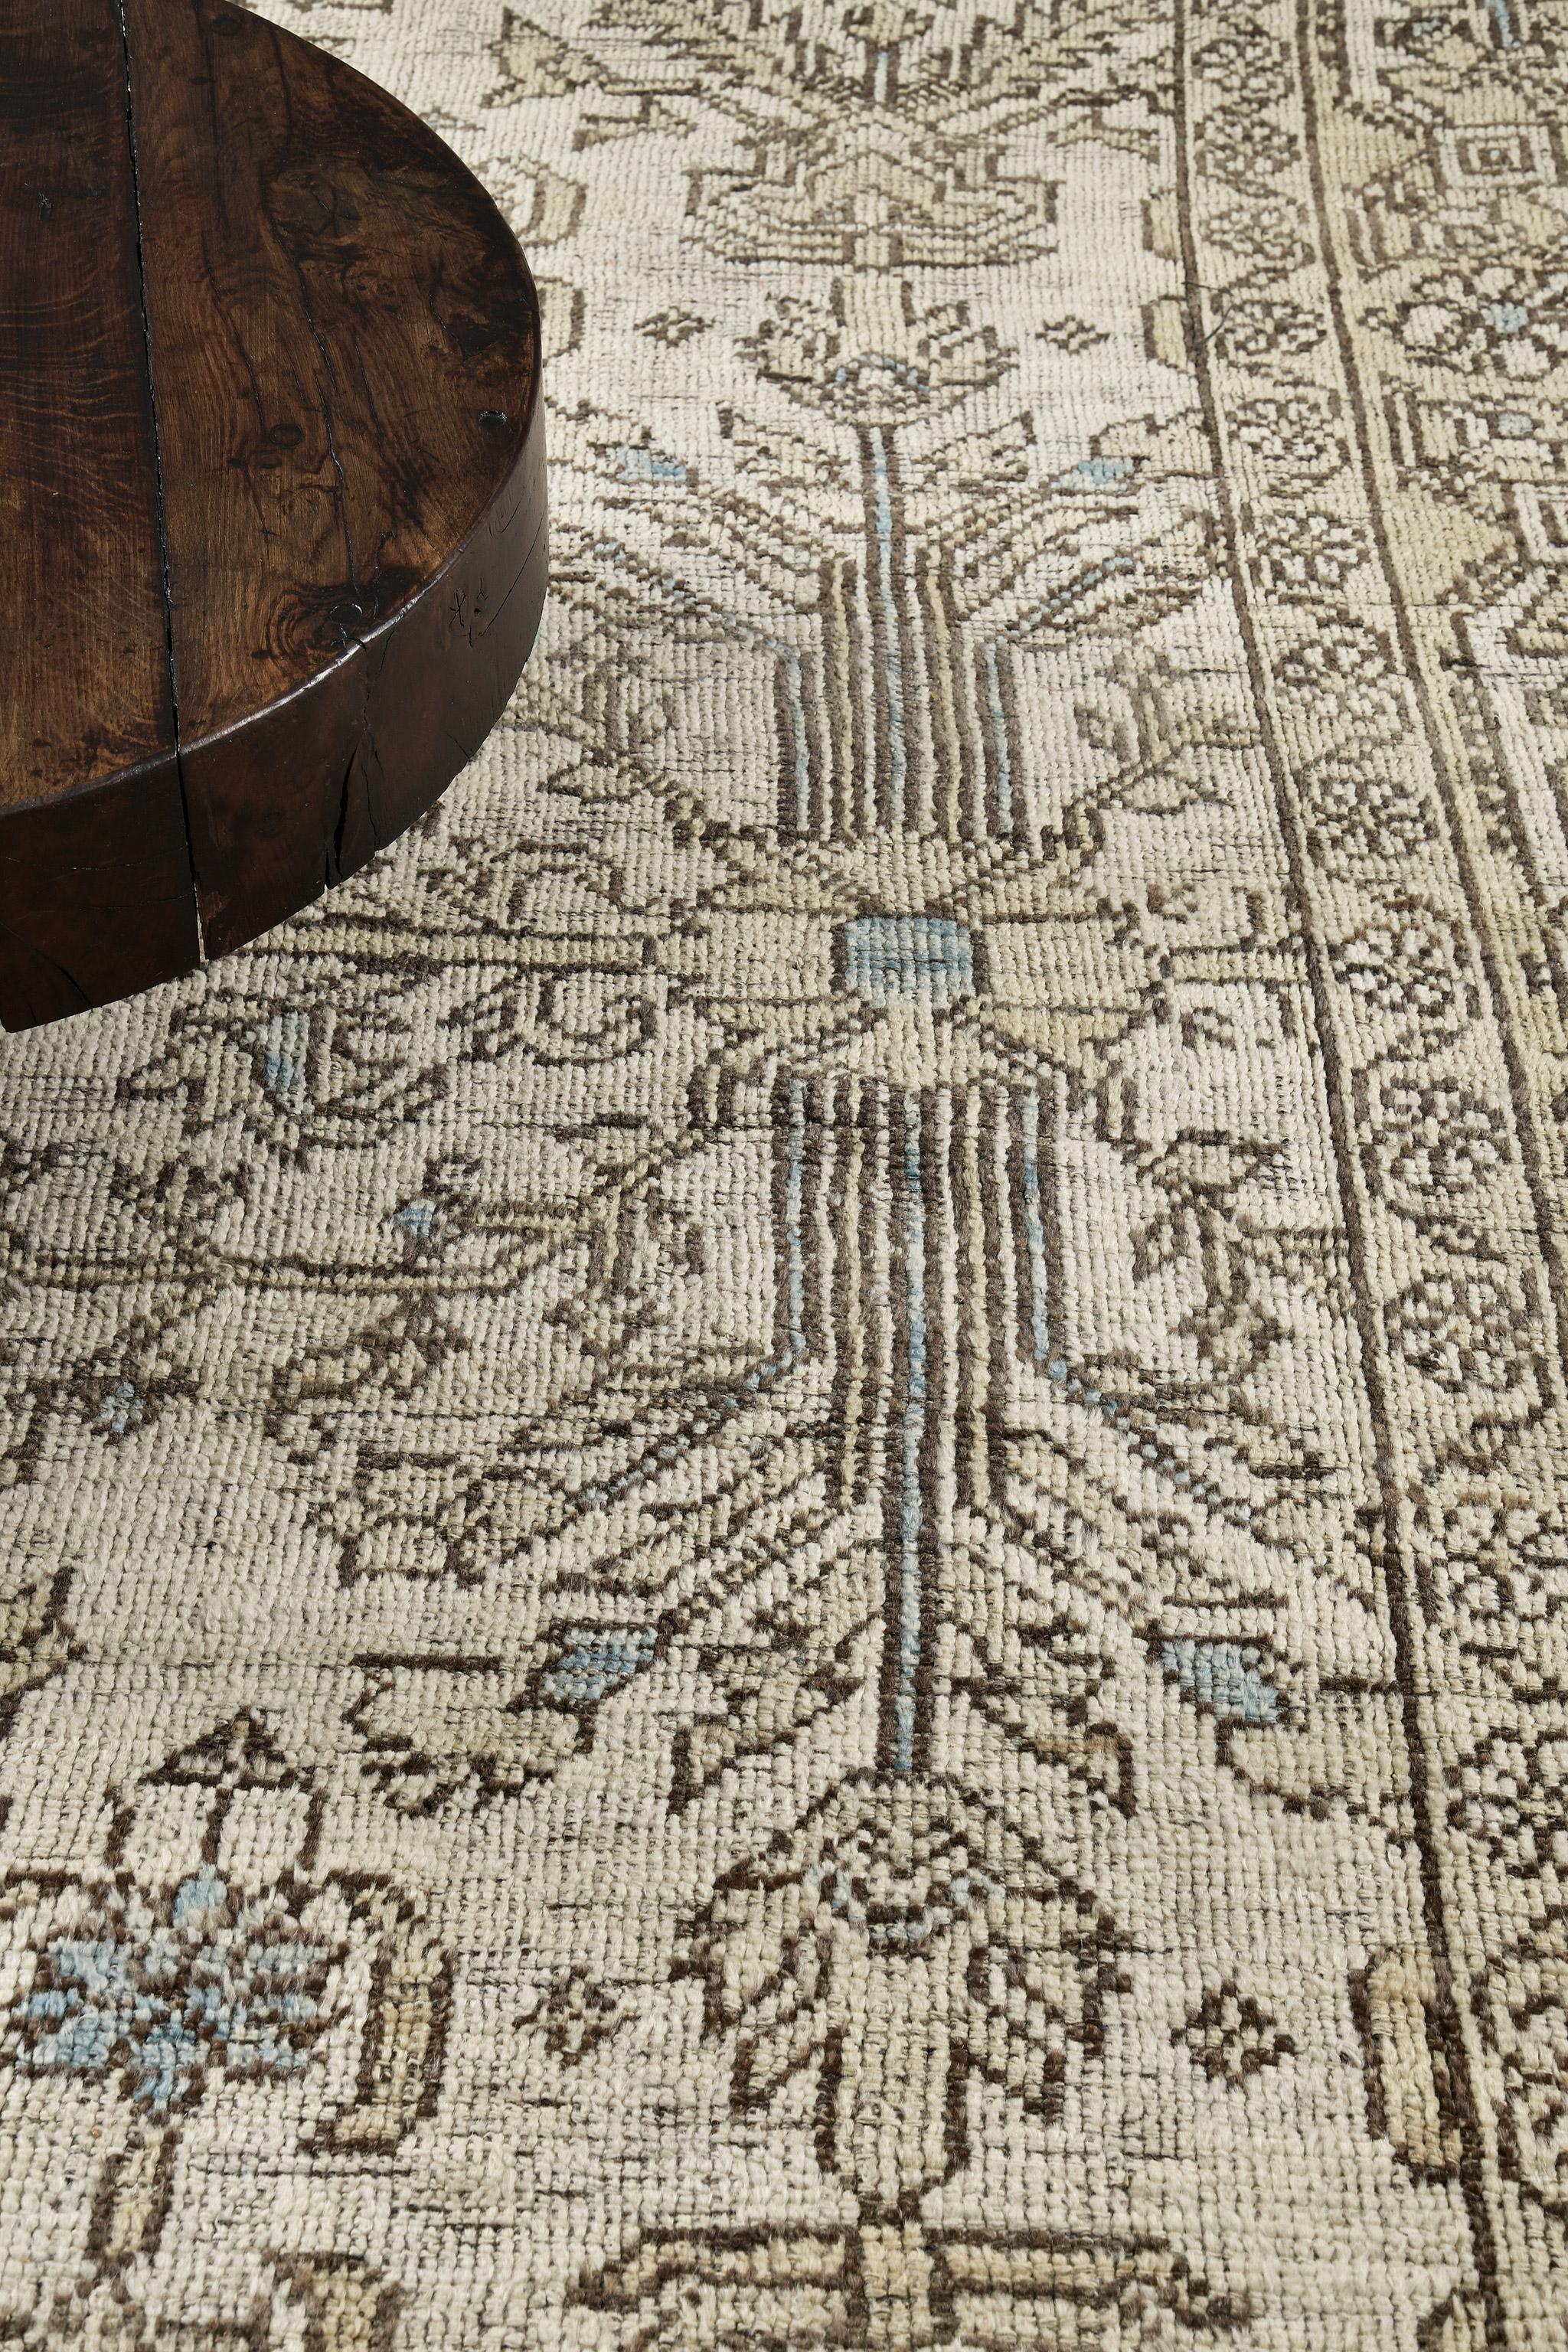 Captivating vines and florid embellishments are expressed through gold accents to a blooming and fascinating beige field. The borders are beautifully woven that were created intricately to form an elegant Zigler Revival Rug. Truly a creative